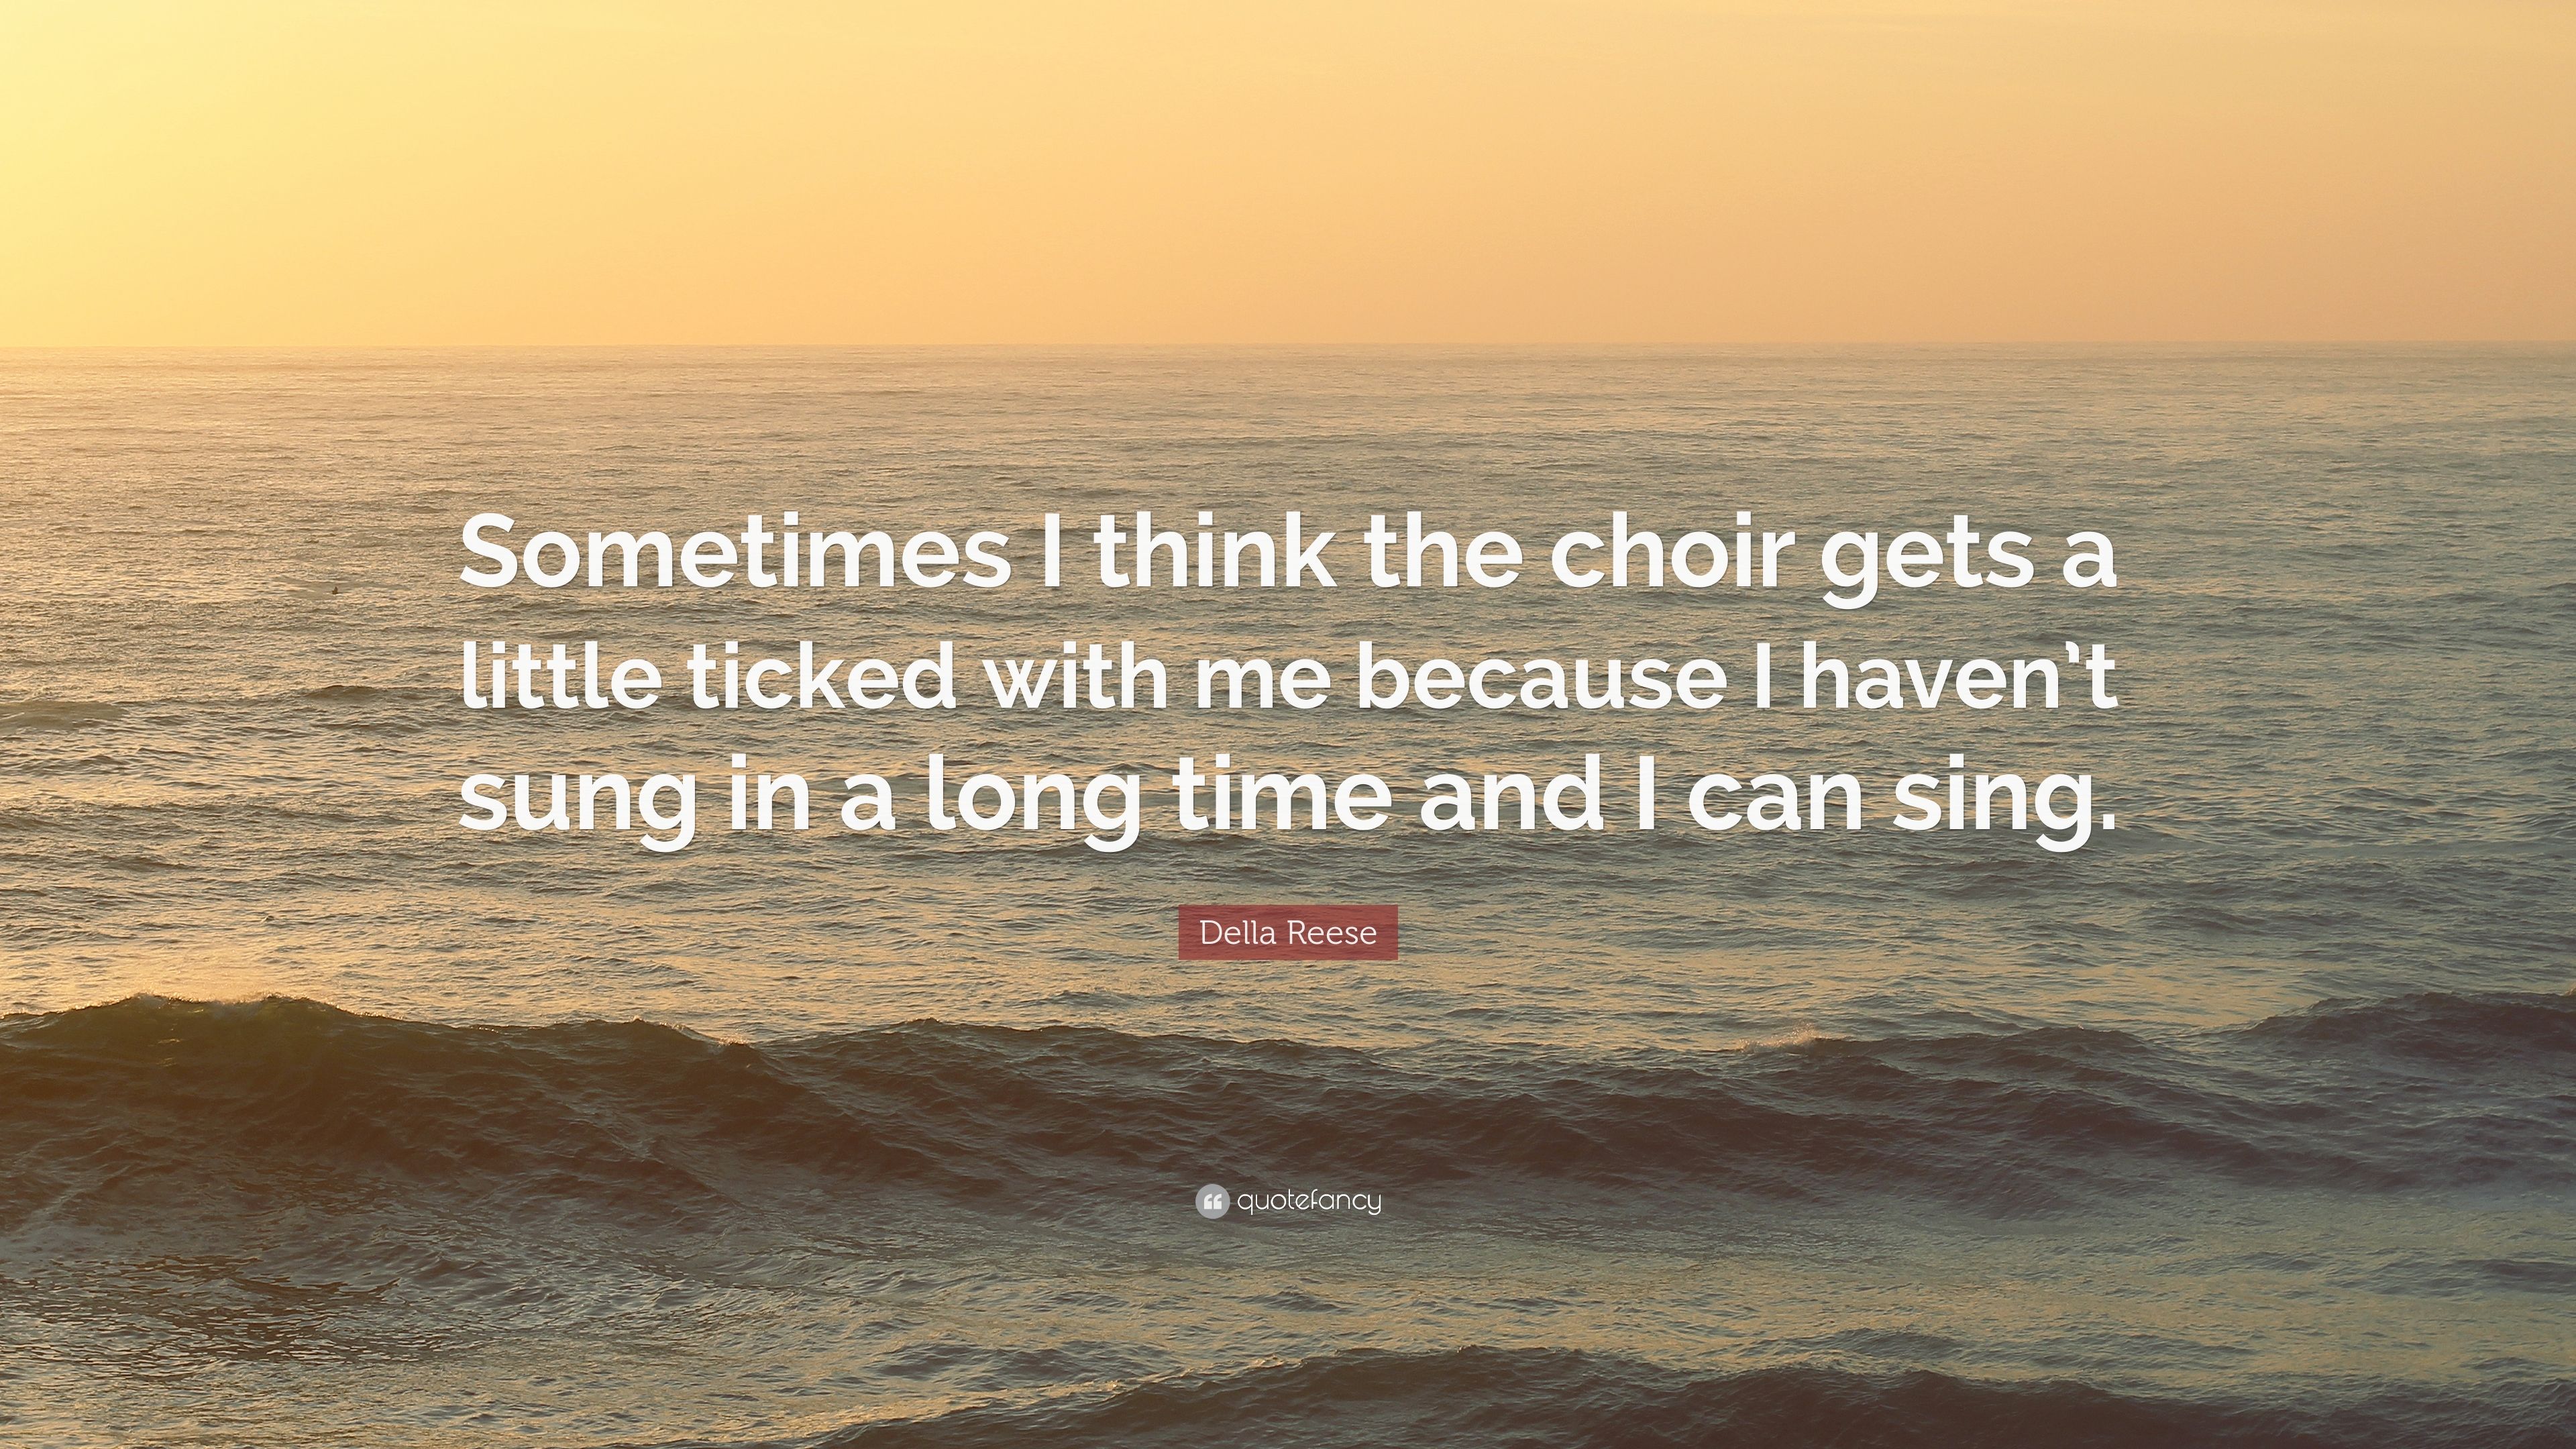 Della Reese Quote: “Sometimes I think the choir gets a little